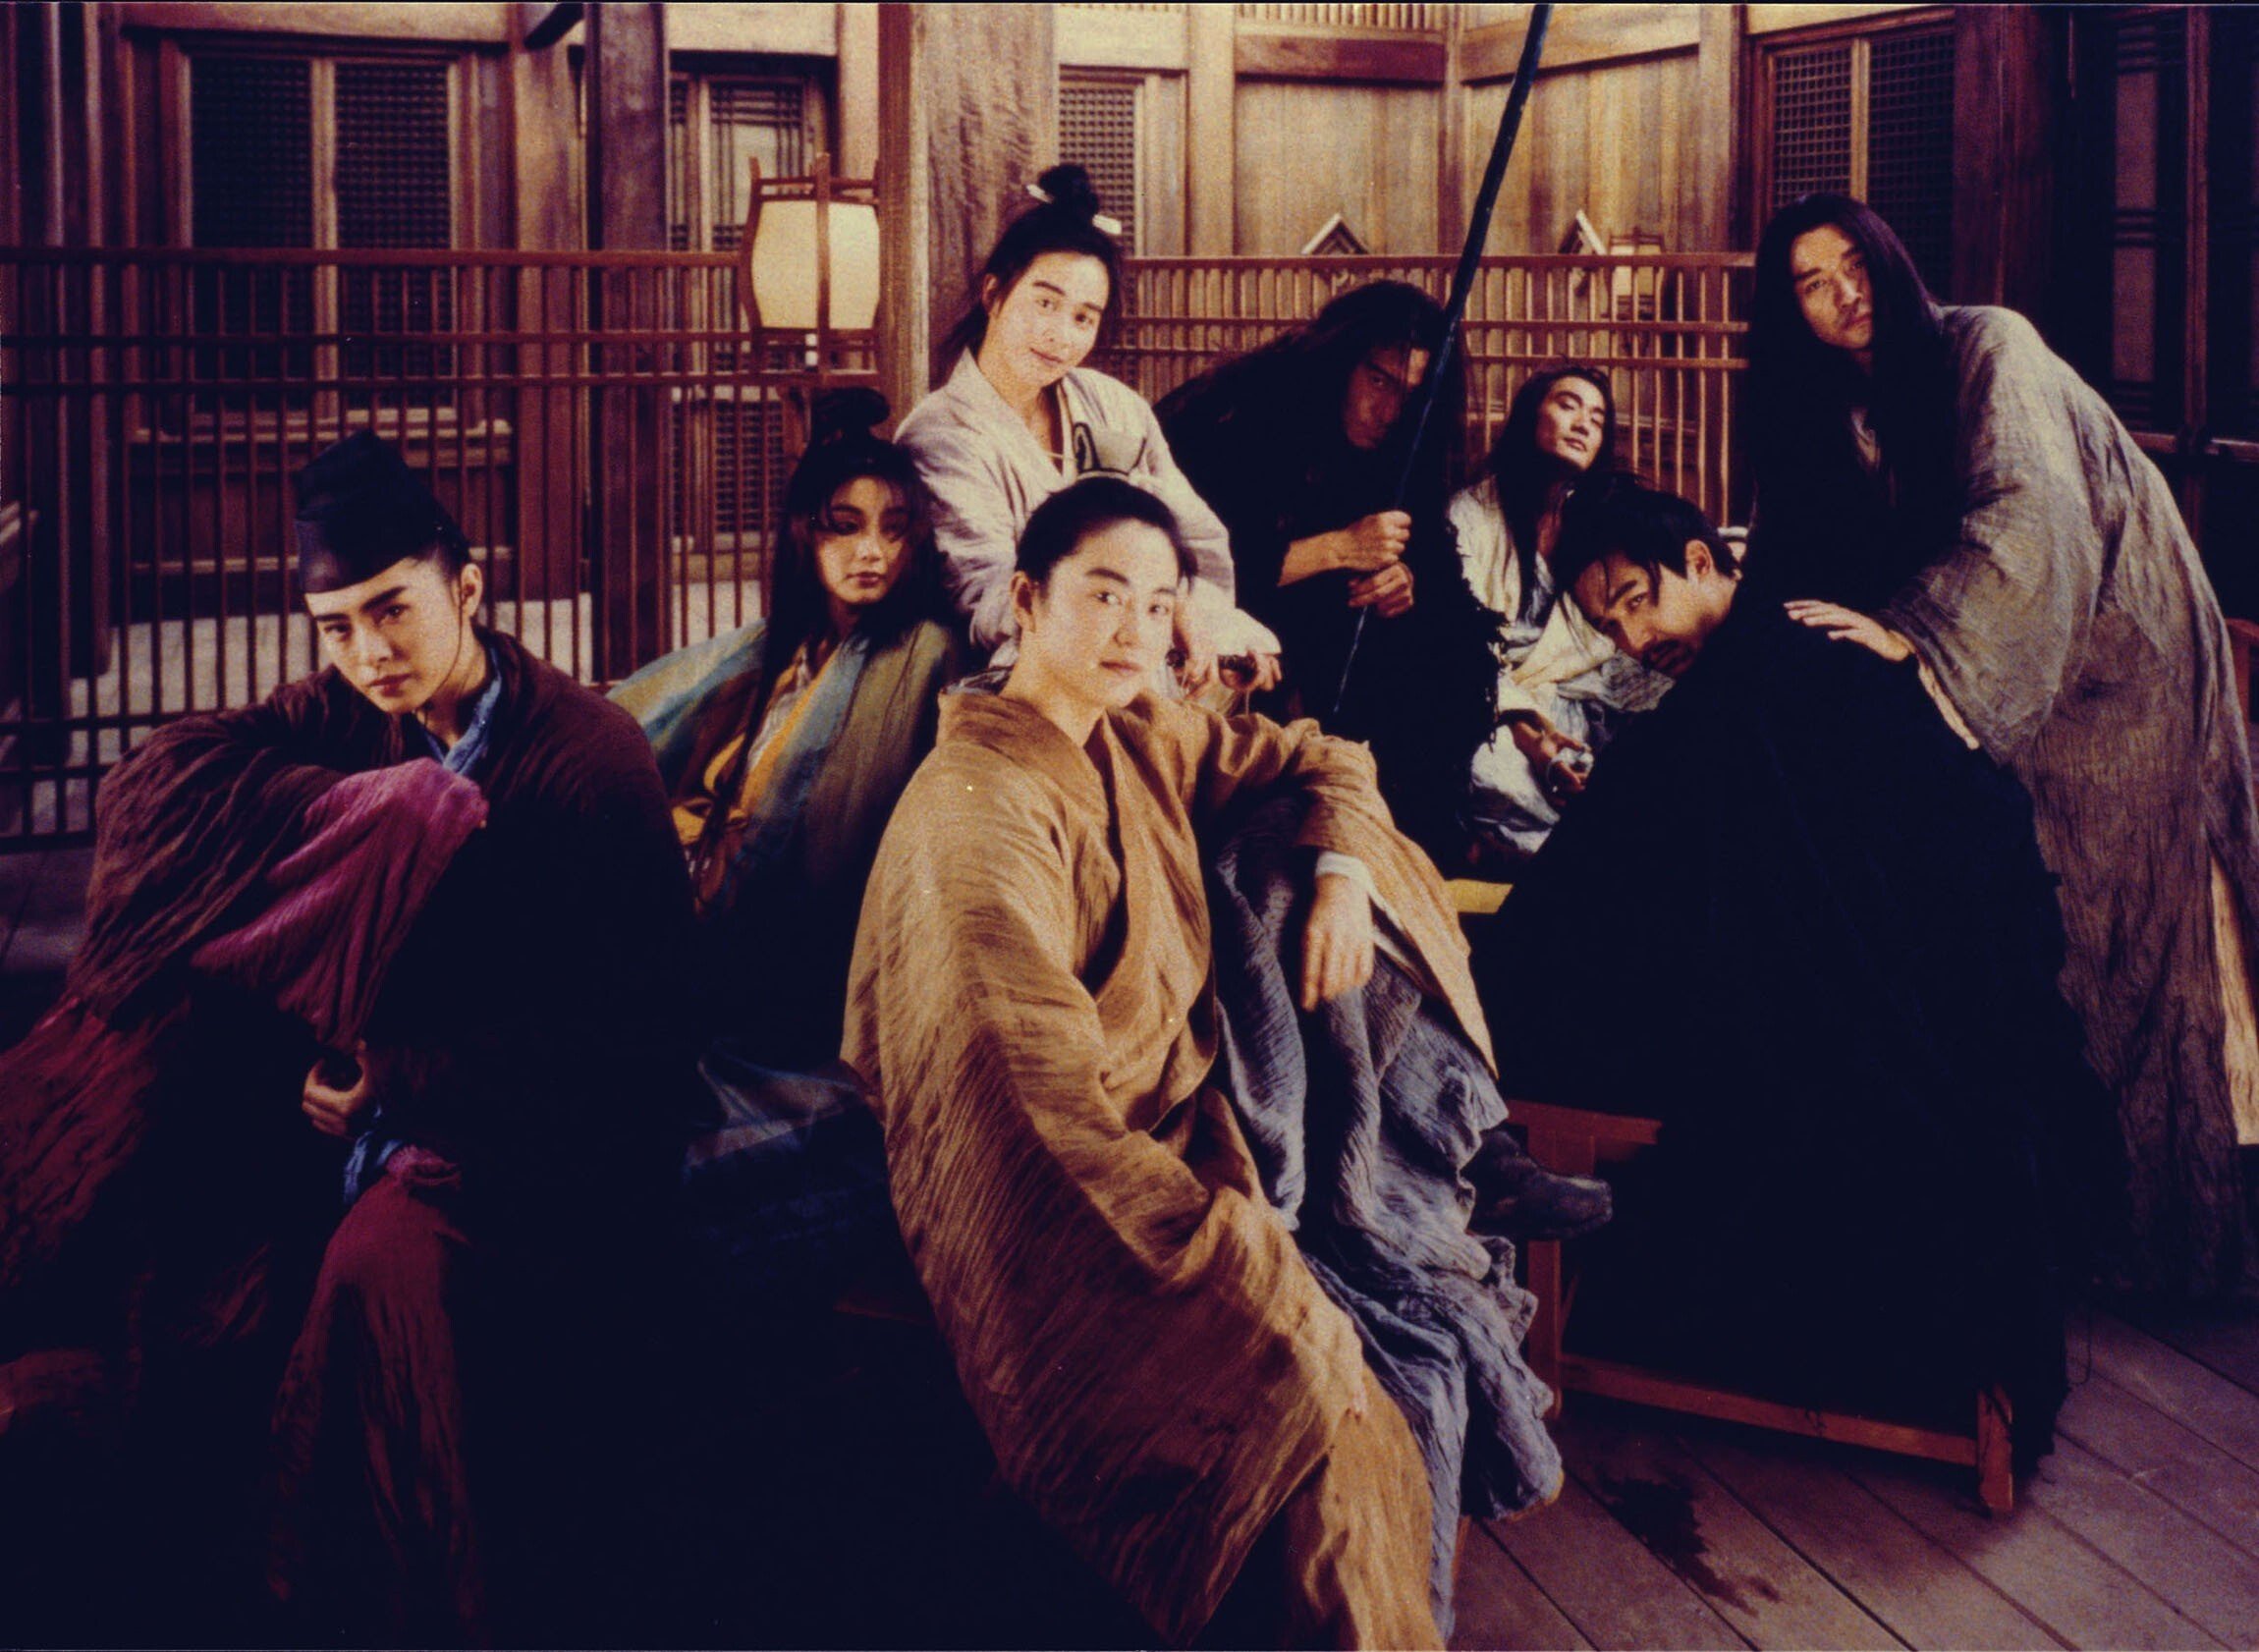 Brigitte Lin Ching-hsia (front) is among the all-star cast of Wong Kar-wai‘s martial arts film Ashes of Time (1994), based on Louis Cha’s novel The Legend of the Condor Shooting Heroes. Photo: Newport Entertainment